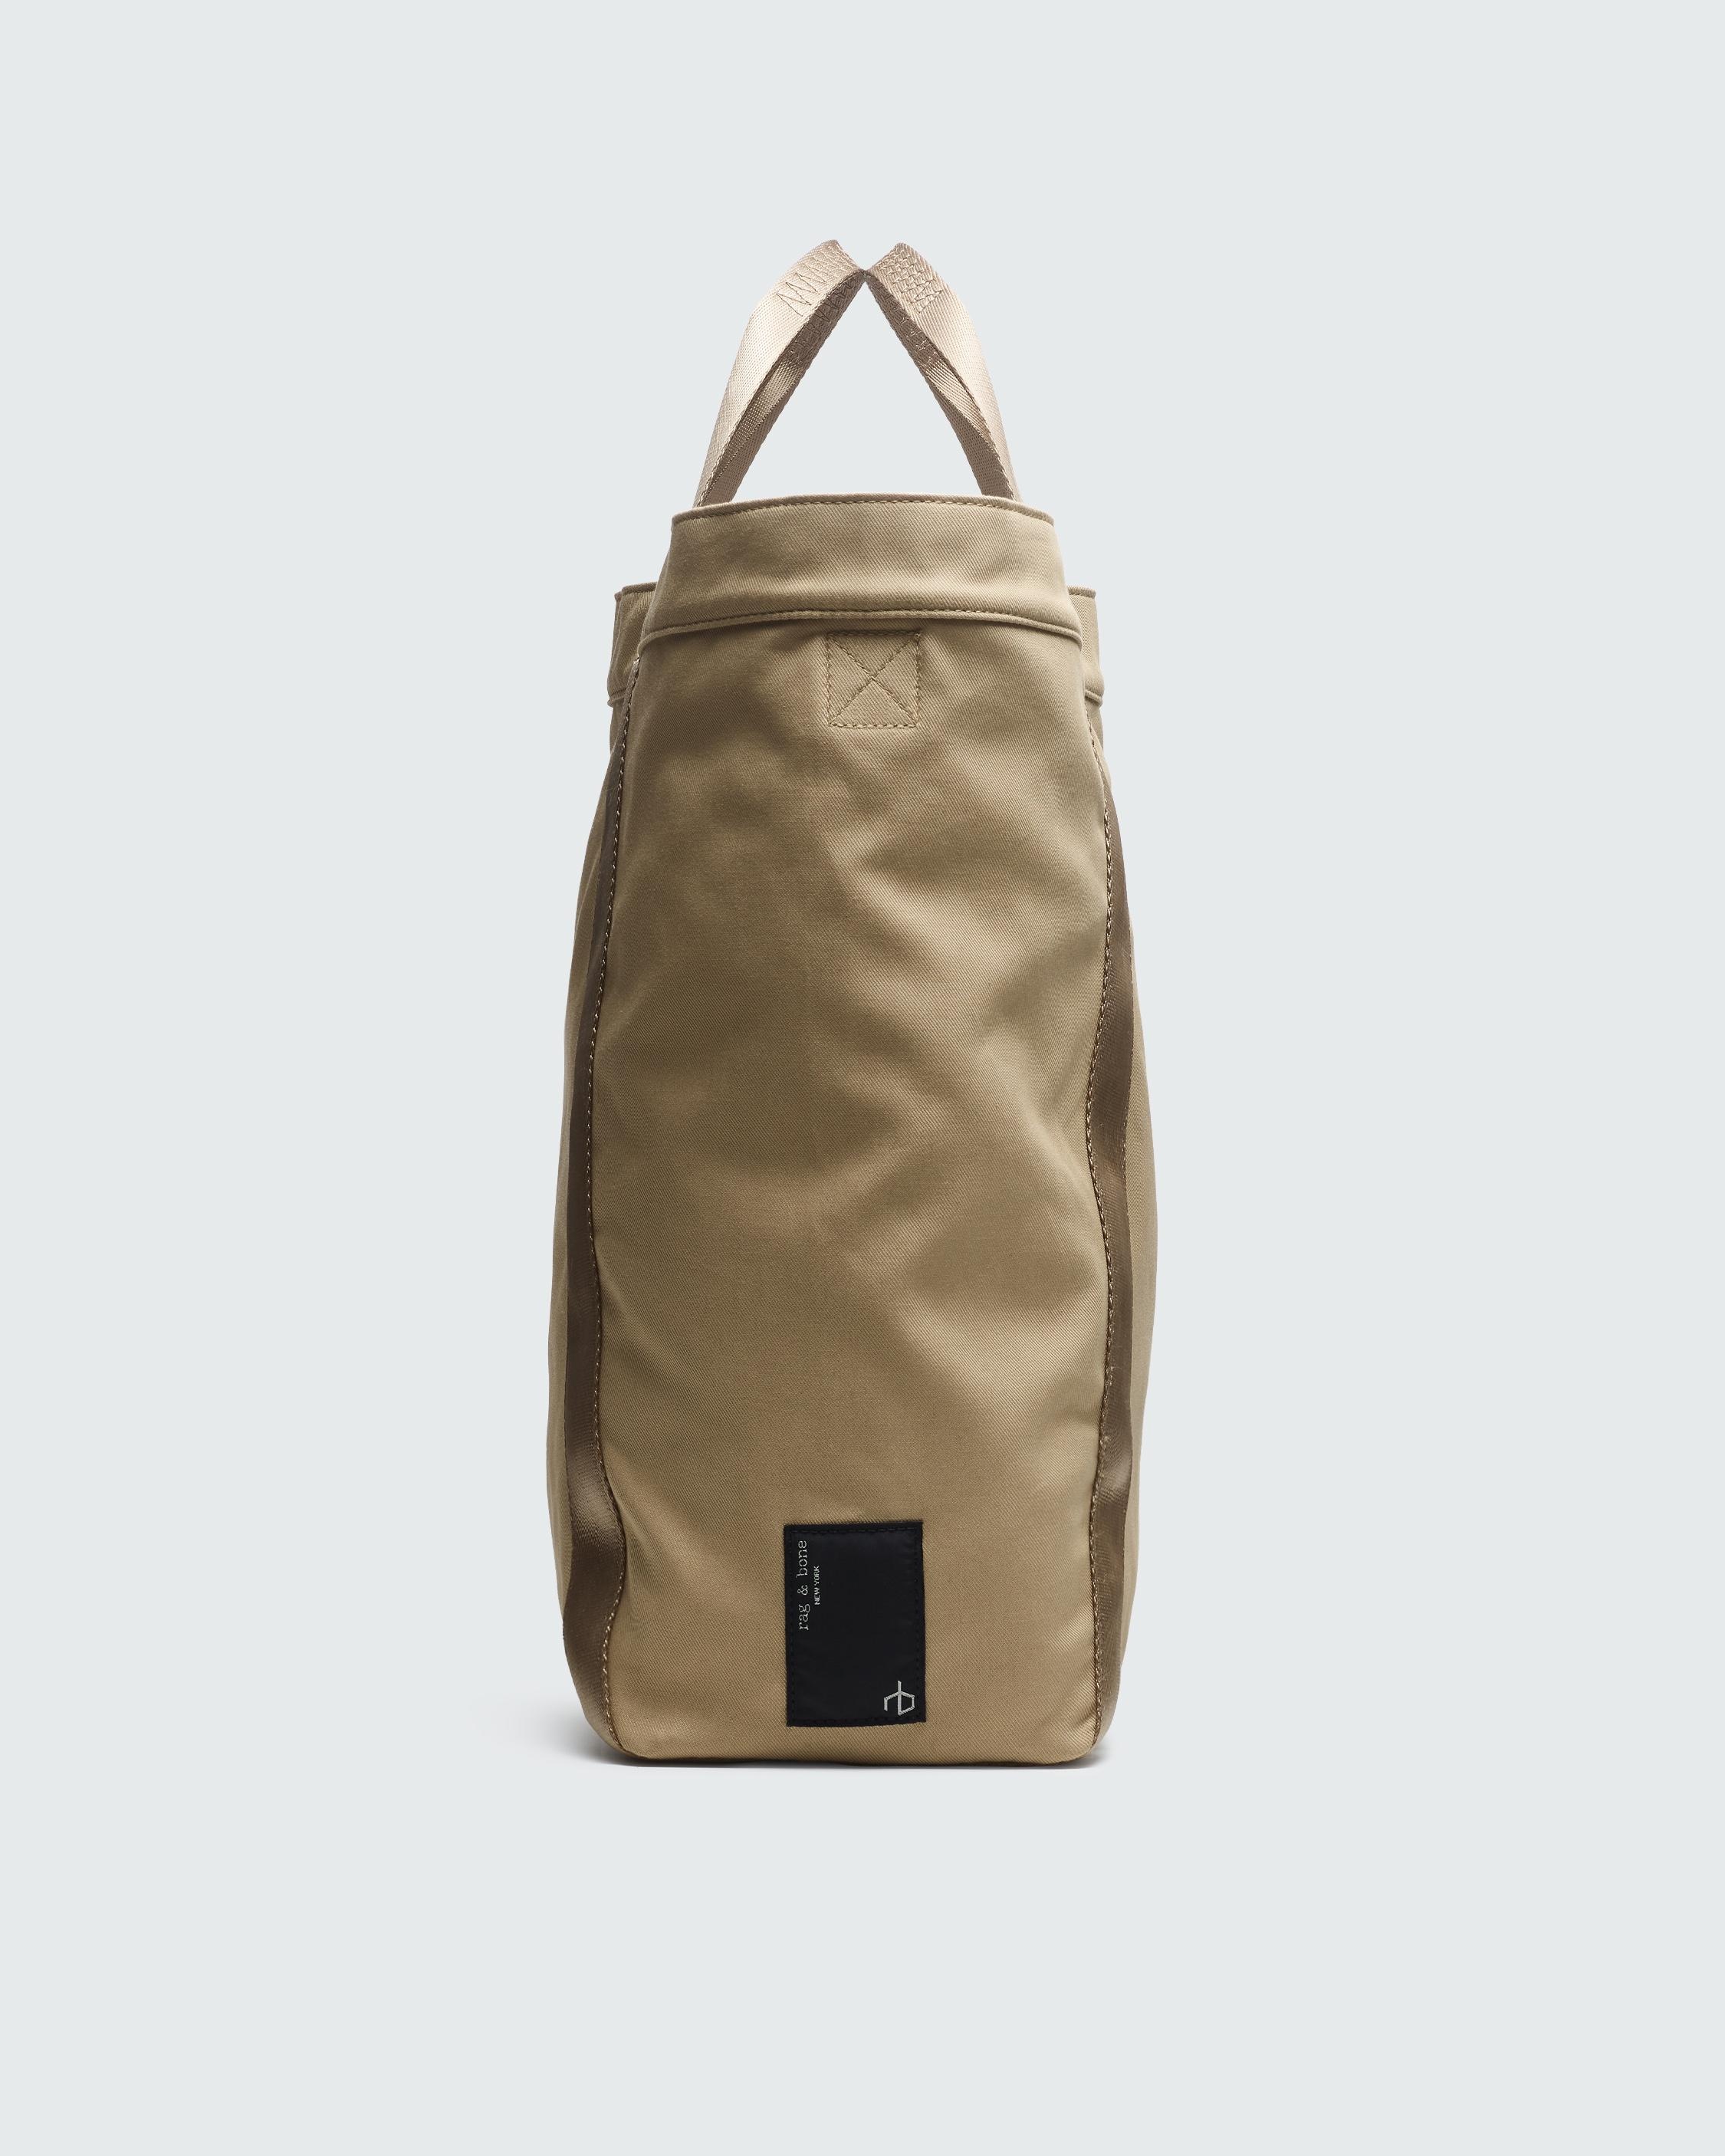 Division Tote - Cotton
Large Tote Bag - 3